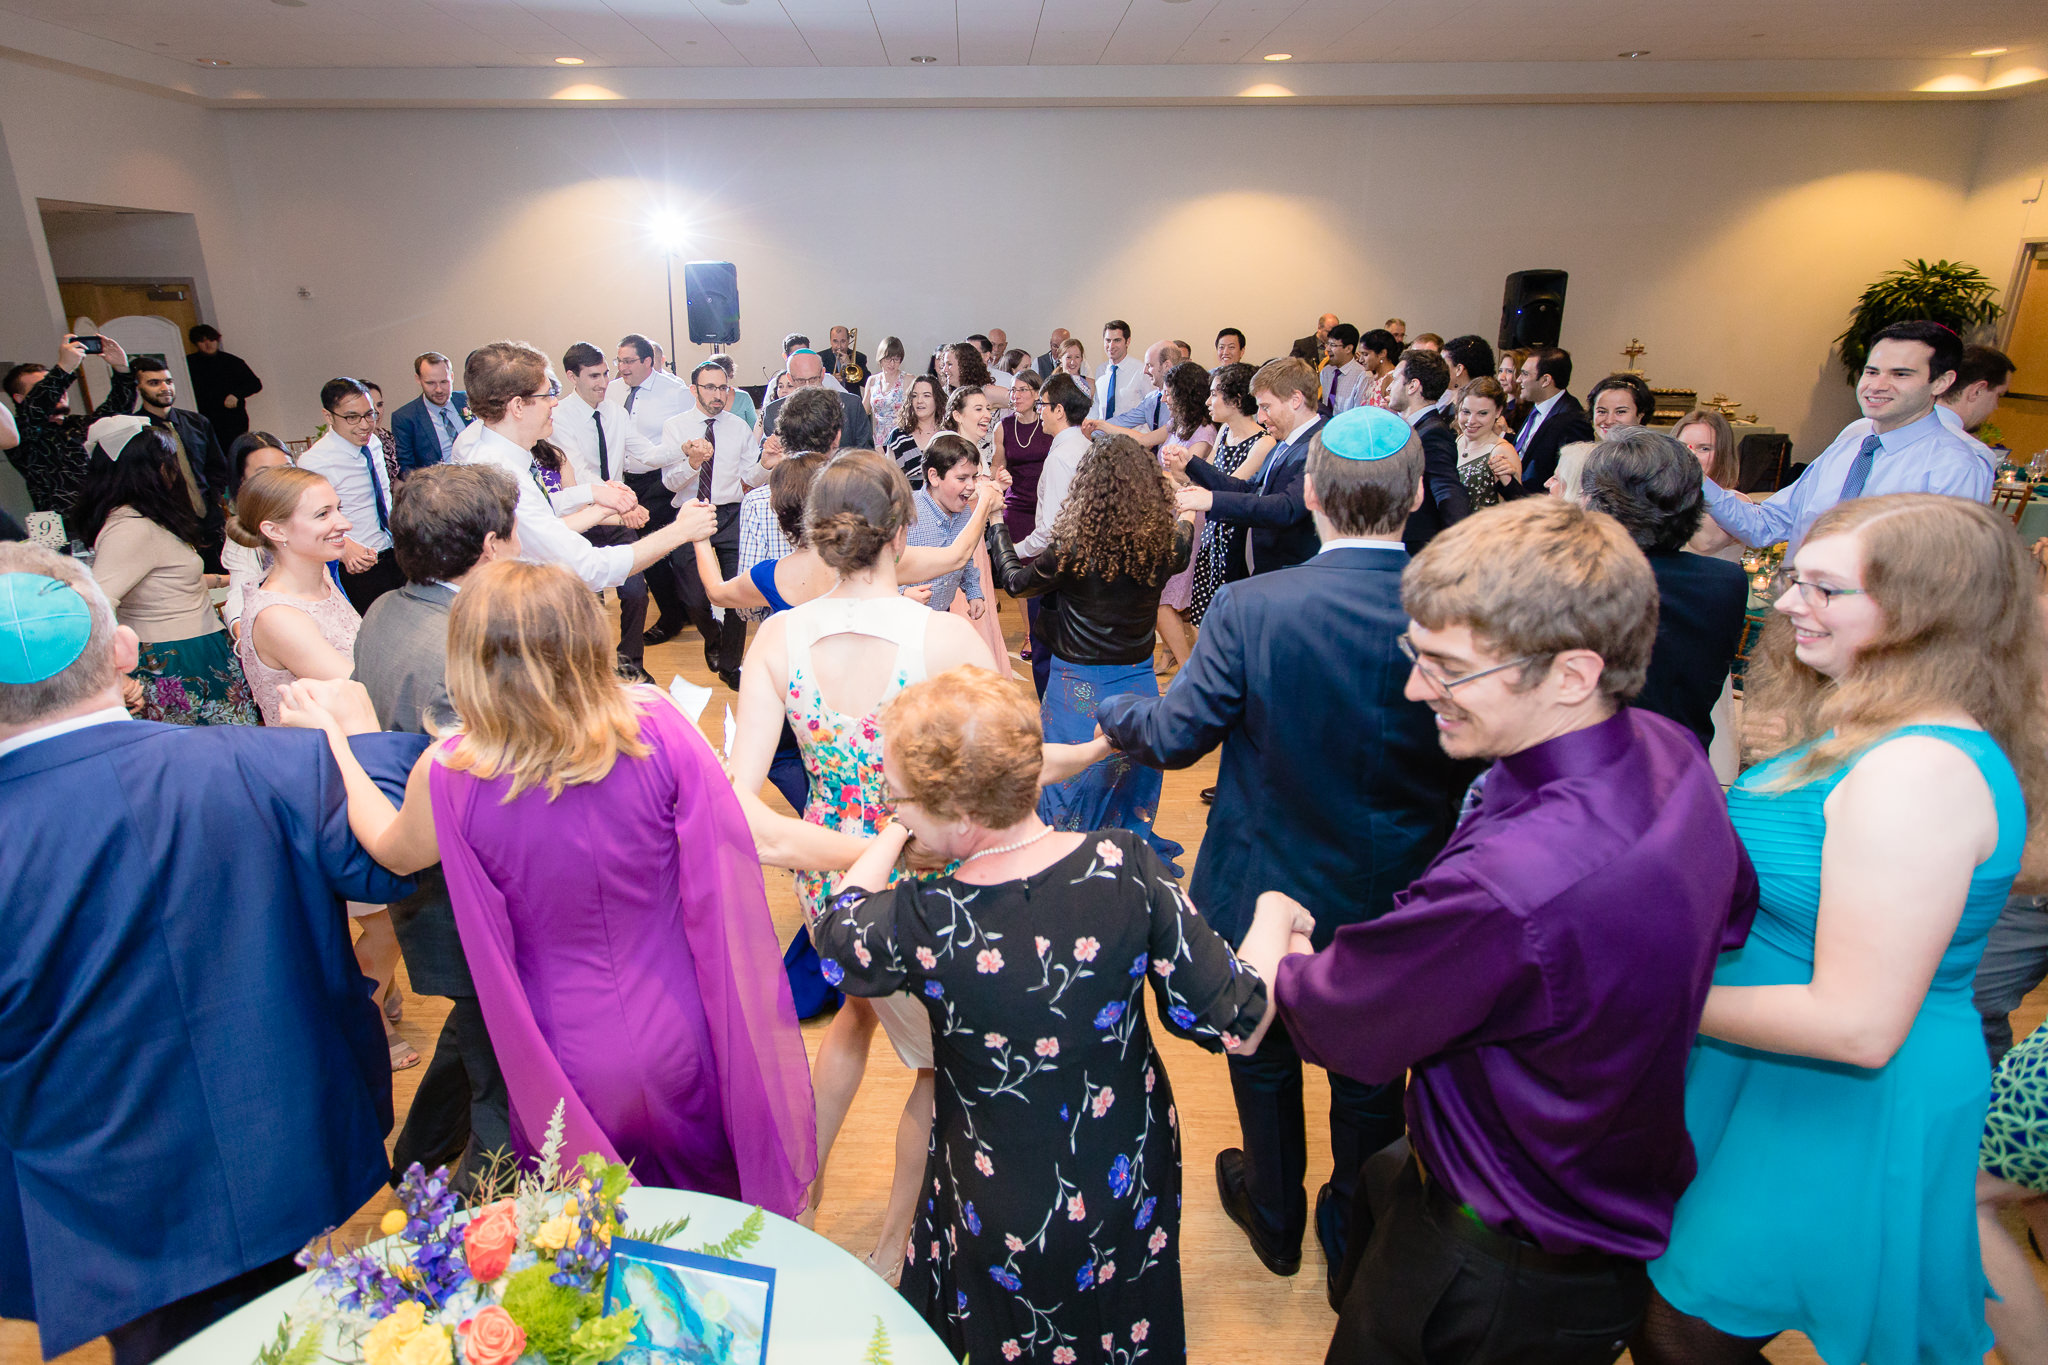 Guests dance the Hora at a Jewish wedding reception at Phipps Conservatory